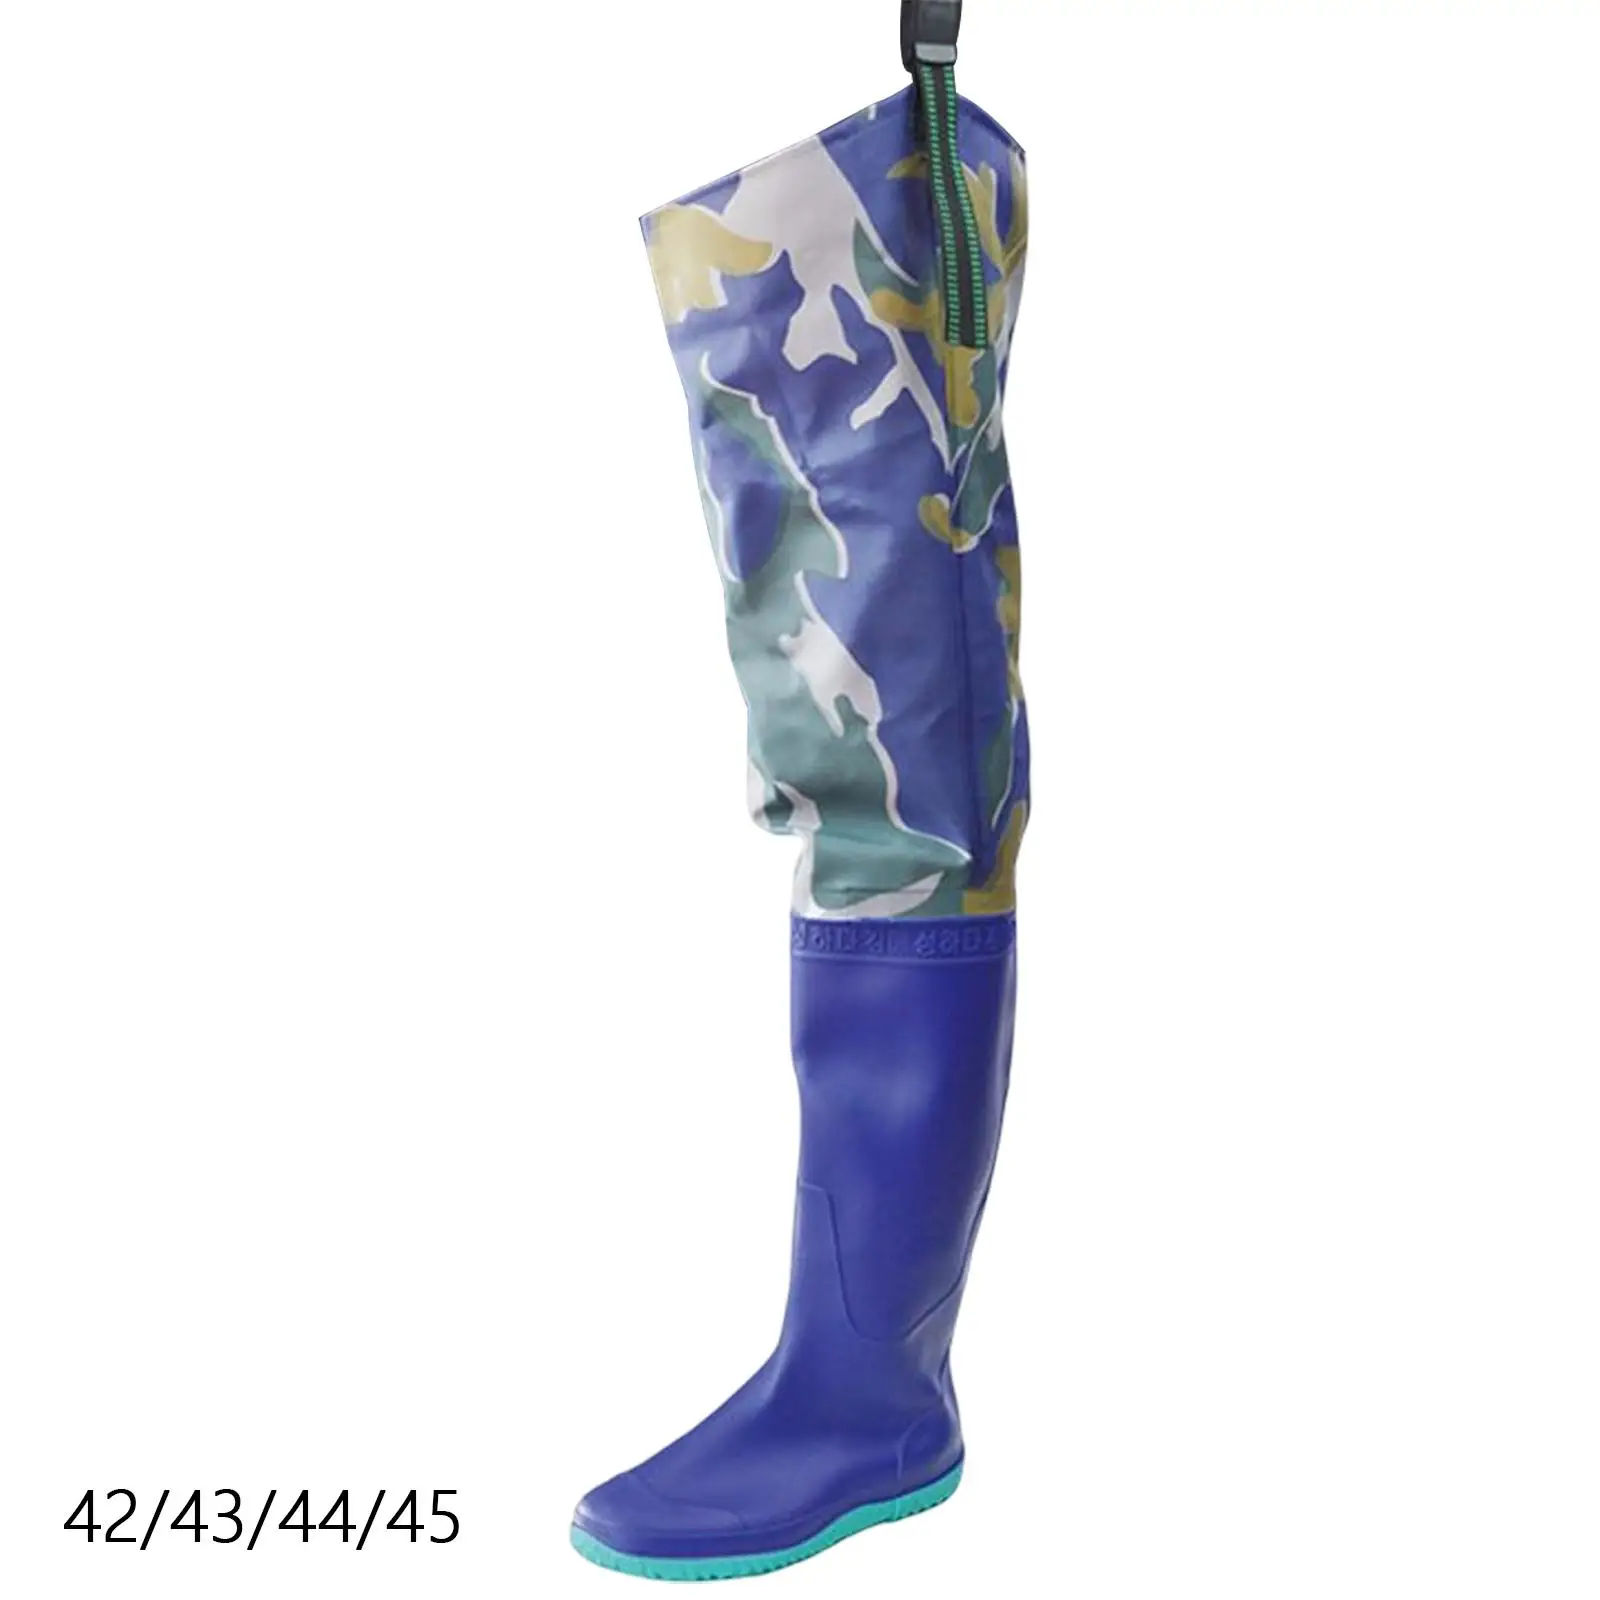 Fishing Waders, Hip Boots Waterproof Waders with Buckle Boots Breathable Nylon